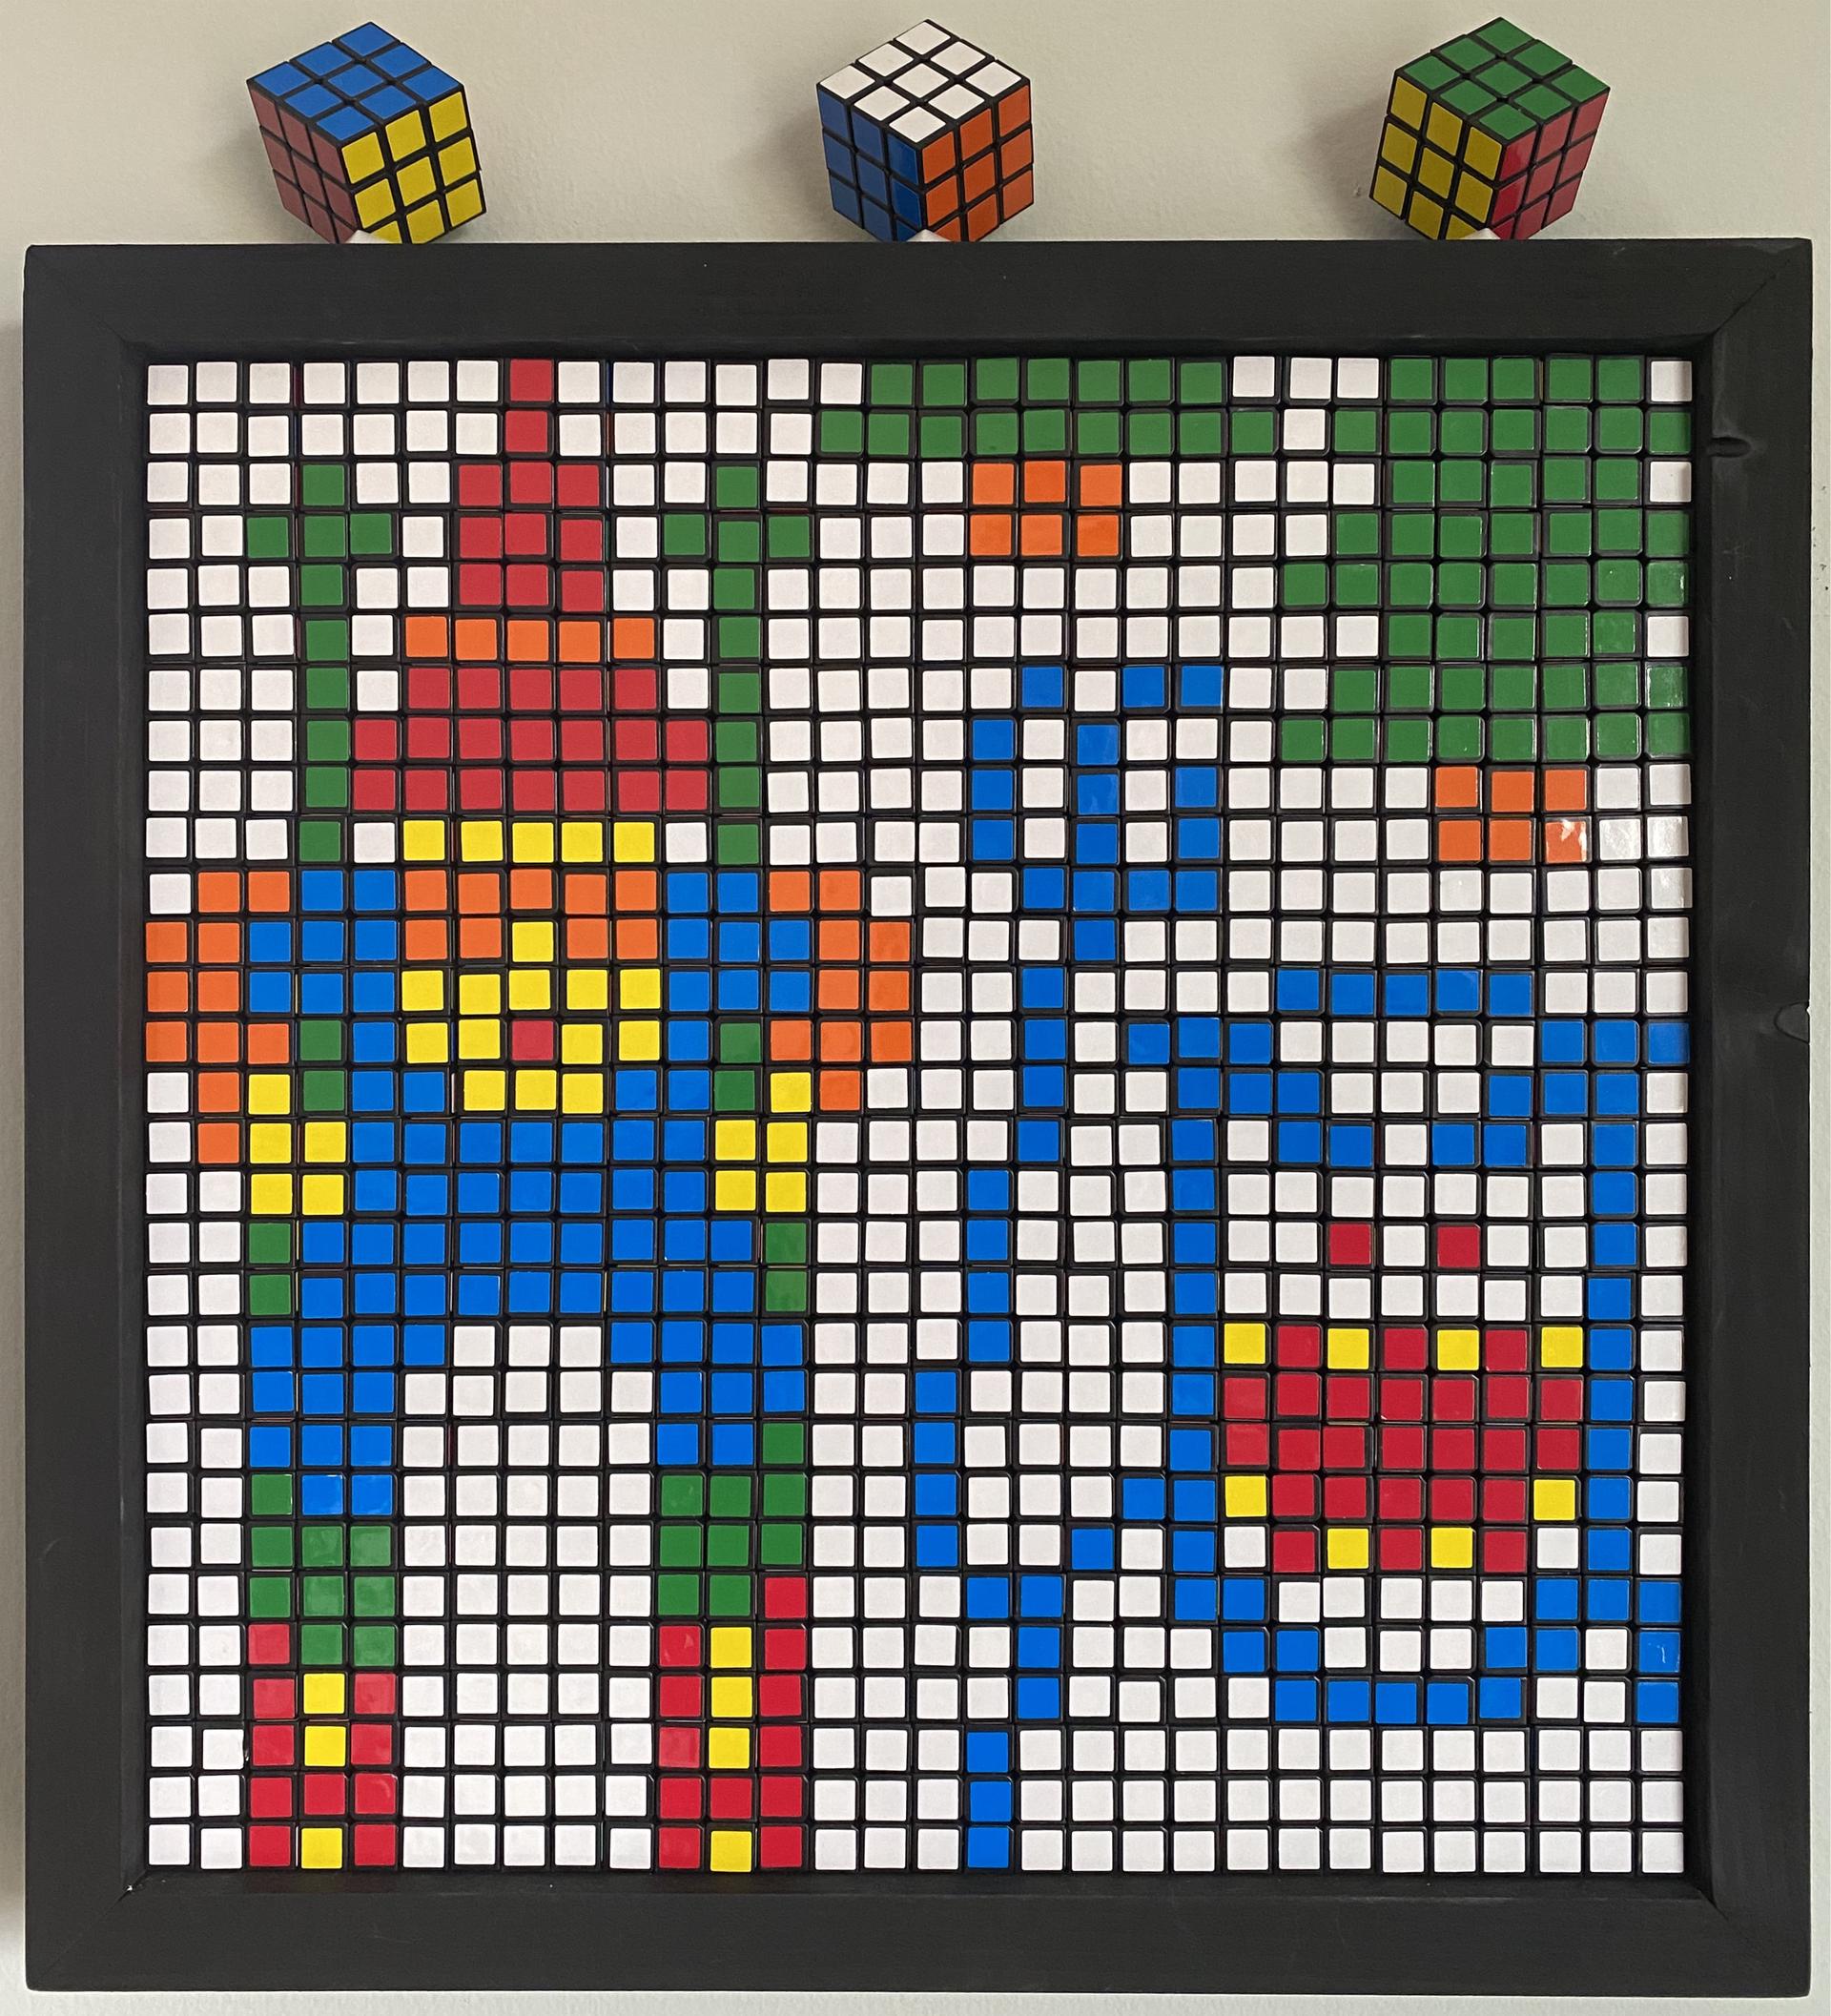 Rubik's cubes as pixel art of a skier, trees, and monster